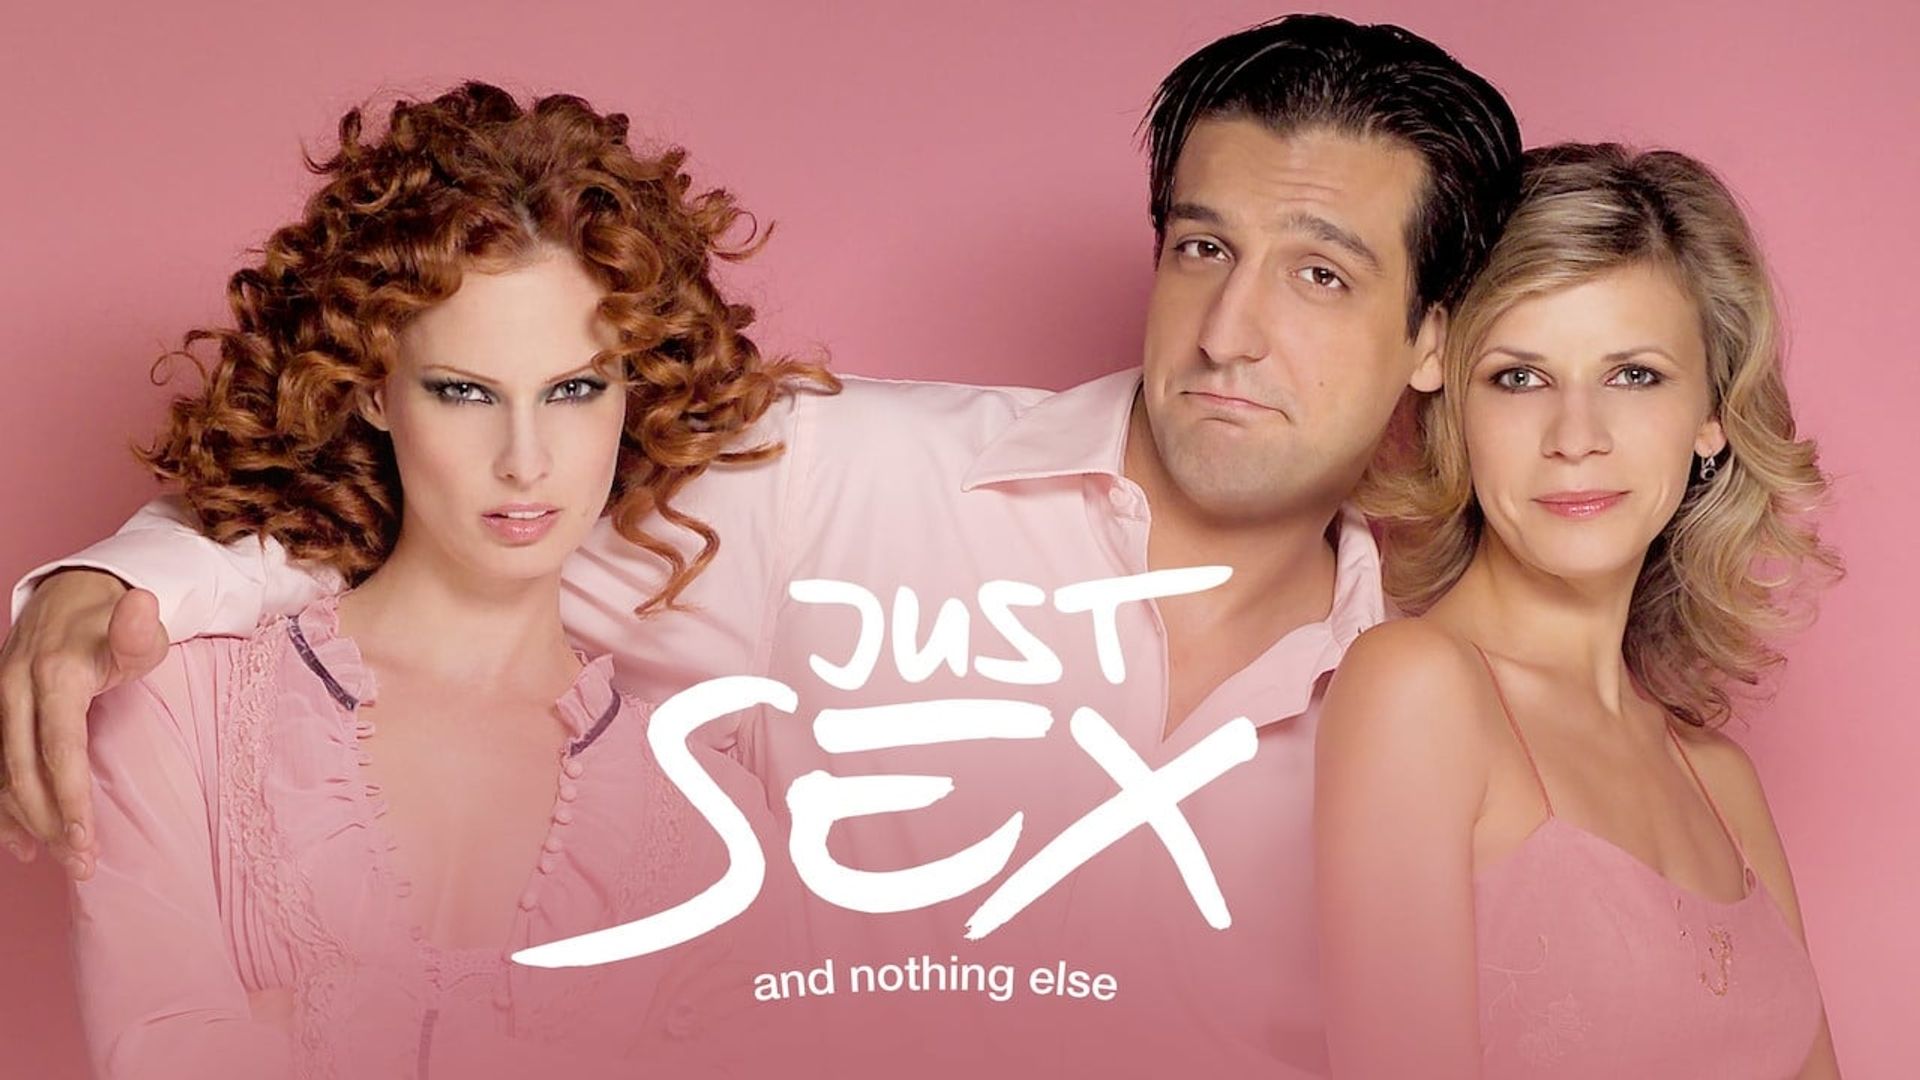 Just Sex and Nothing Else Backdrop